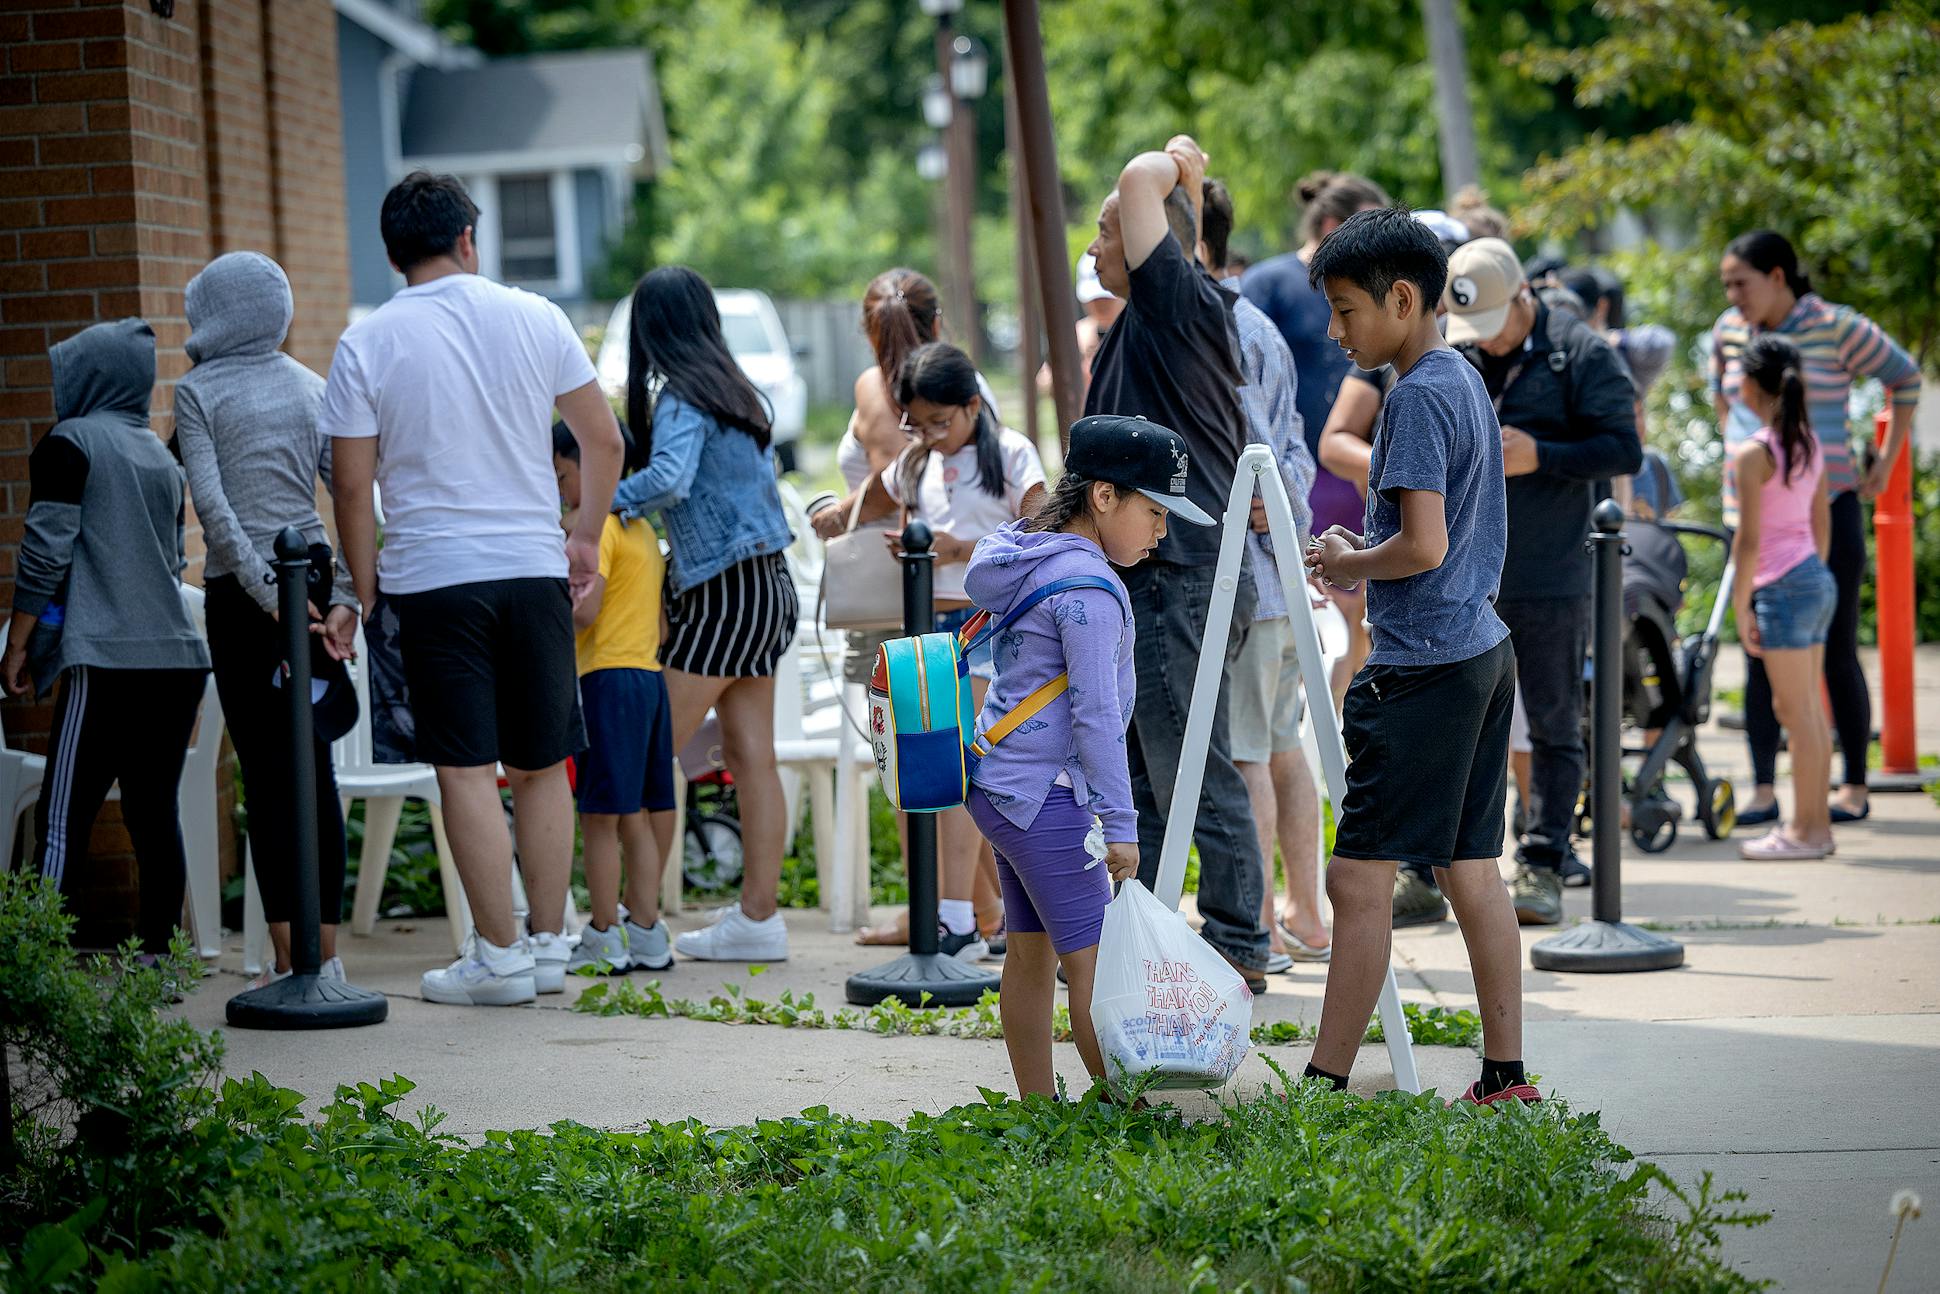 People, mostly Ecuadorians, line up to get food from a food shelf in Minneapolis.